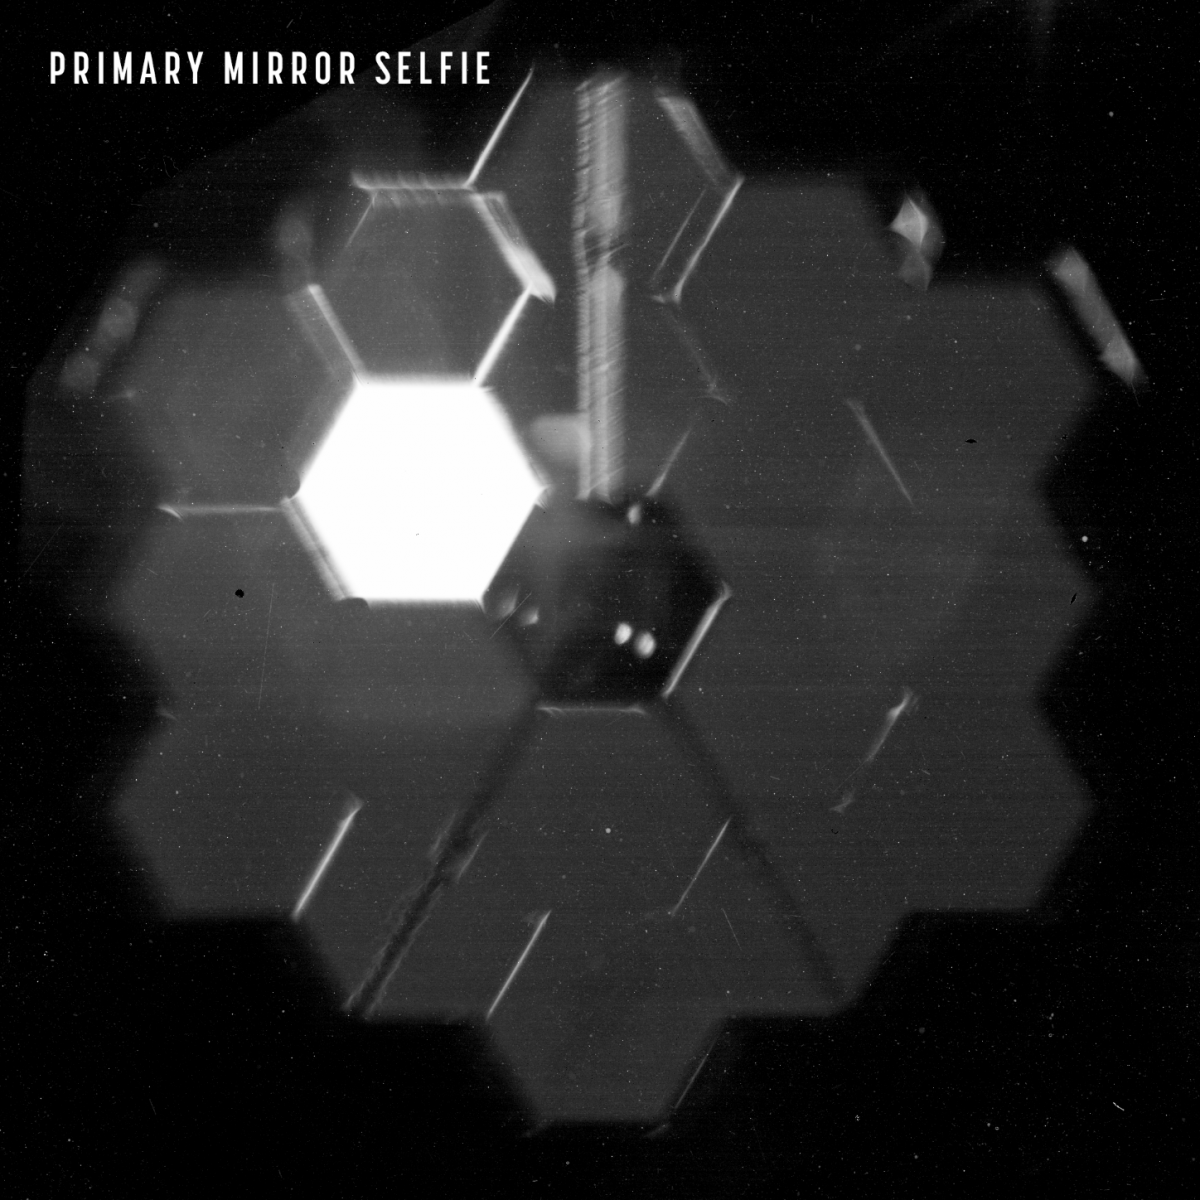 A "selfie" shows the 18 segments of the James Webb Space Telescope's primary mirror as seen from a specialized camera inside the NIRCam instrument.